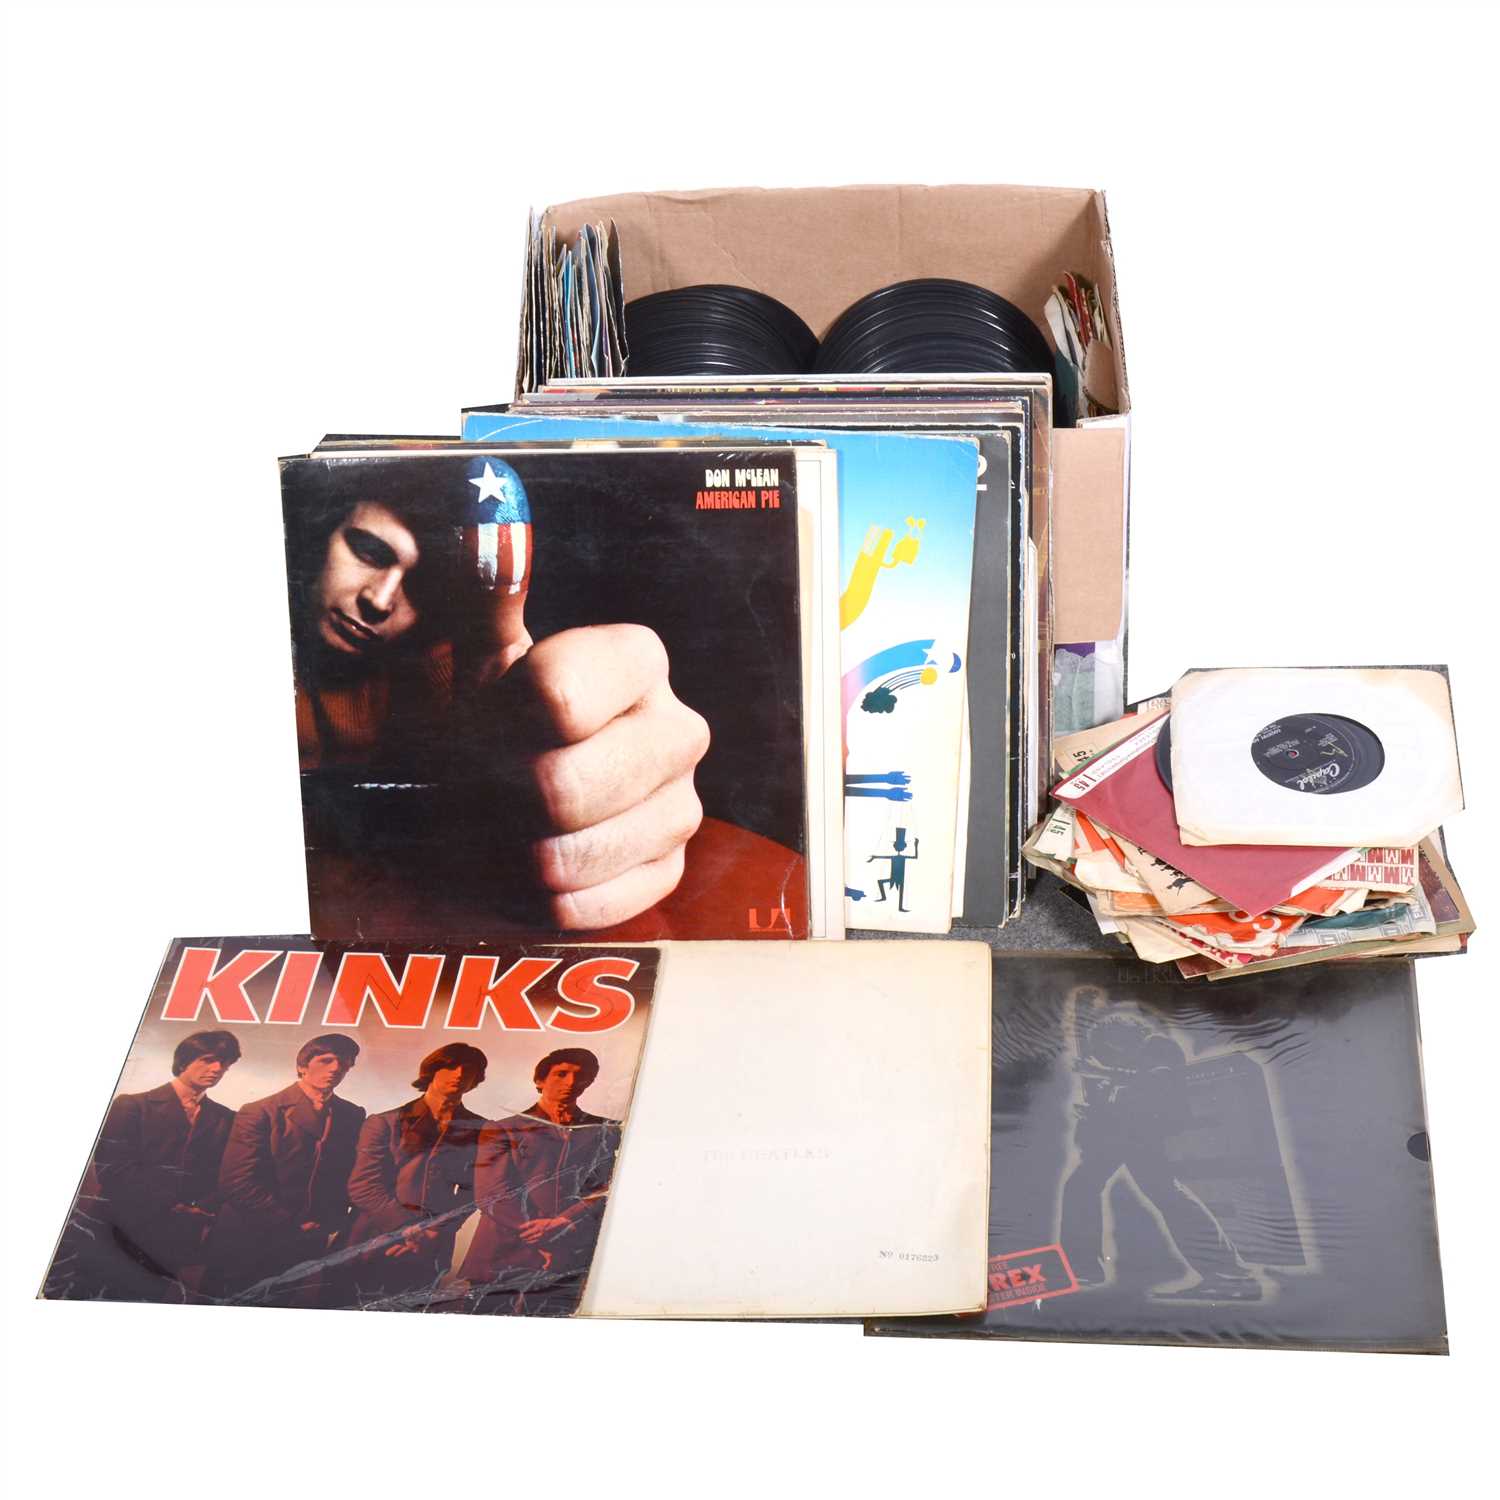 Lot 688 - Vinyl LP and 7" singles; a collection of mostly Pop and Rock music, including The Beatles White Album